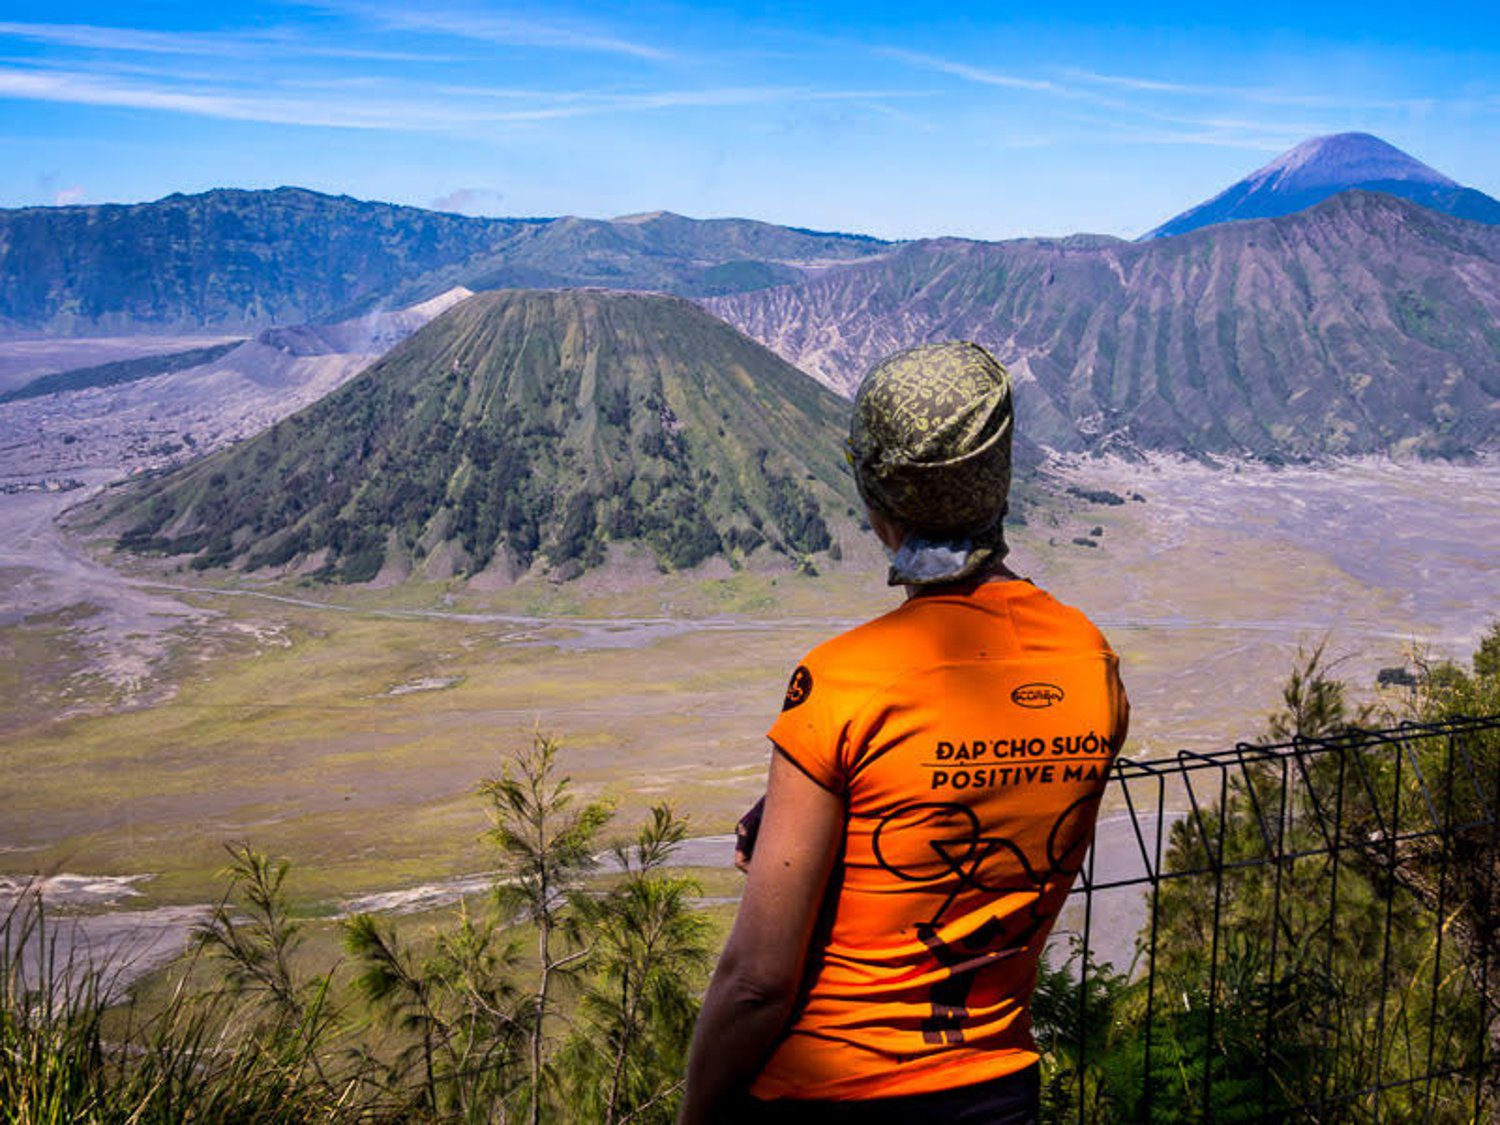 Jane takes in the beauty of Mount Bromo, Indonesia after a long, steep climb.